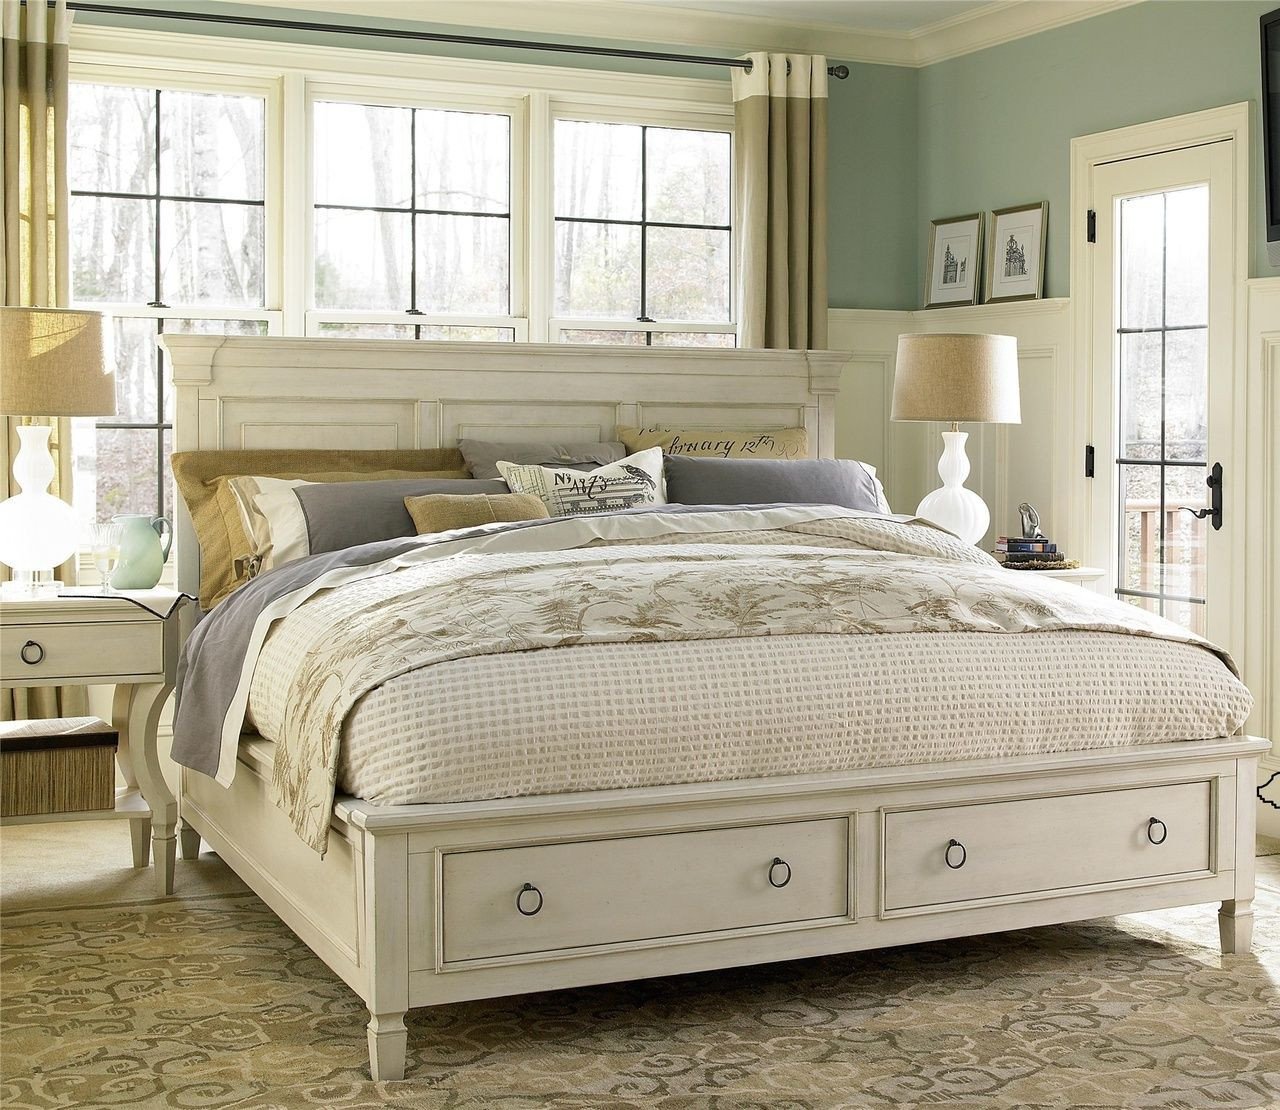 Full Size Bedroom Furniture Set Sale Luxury Country Chic Wood King Size White Storage Bed